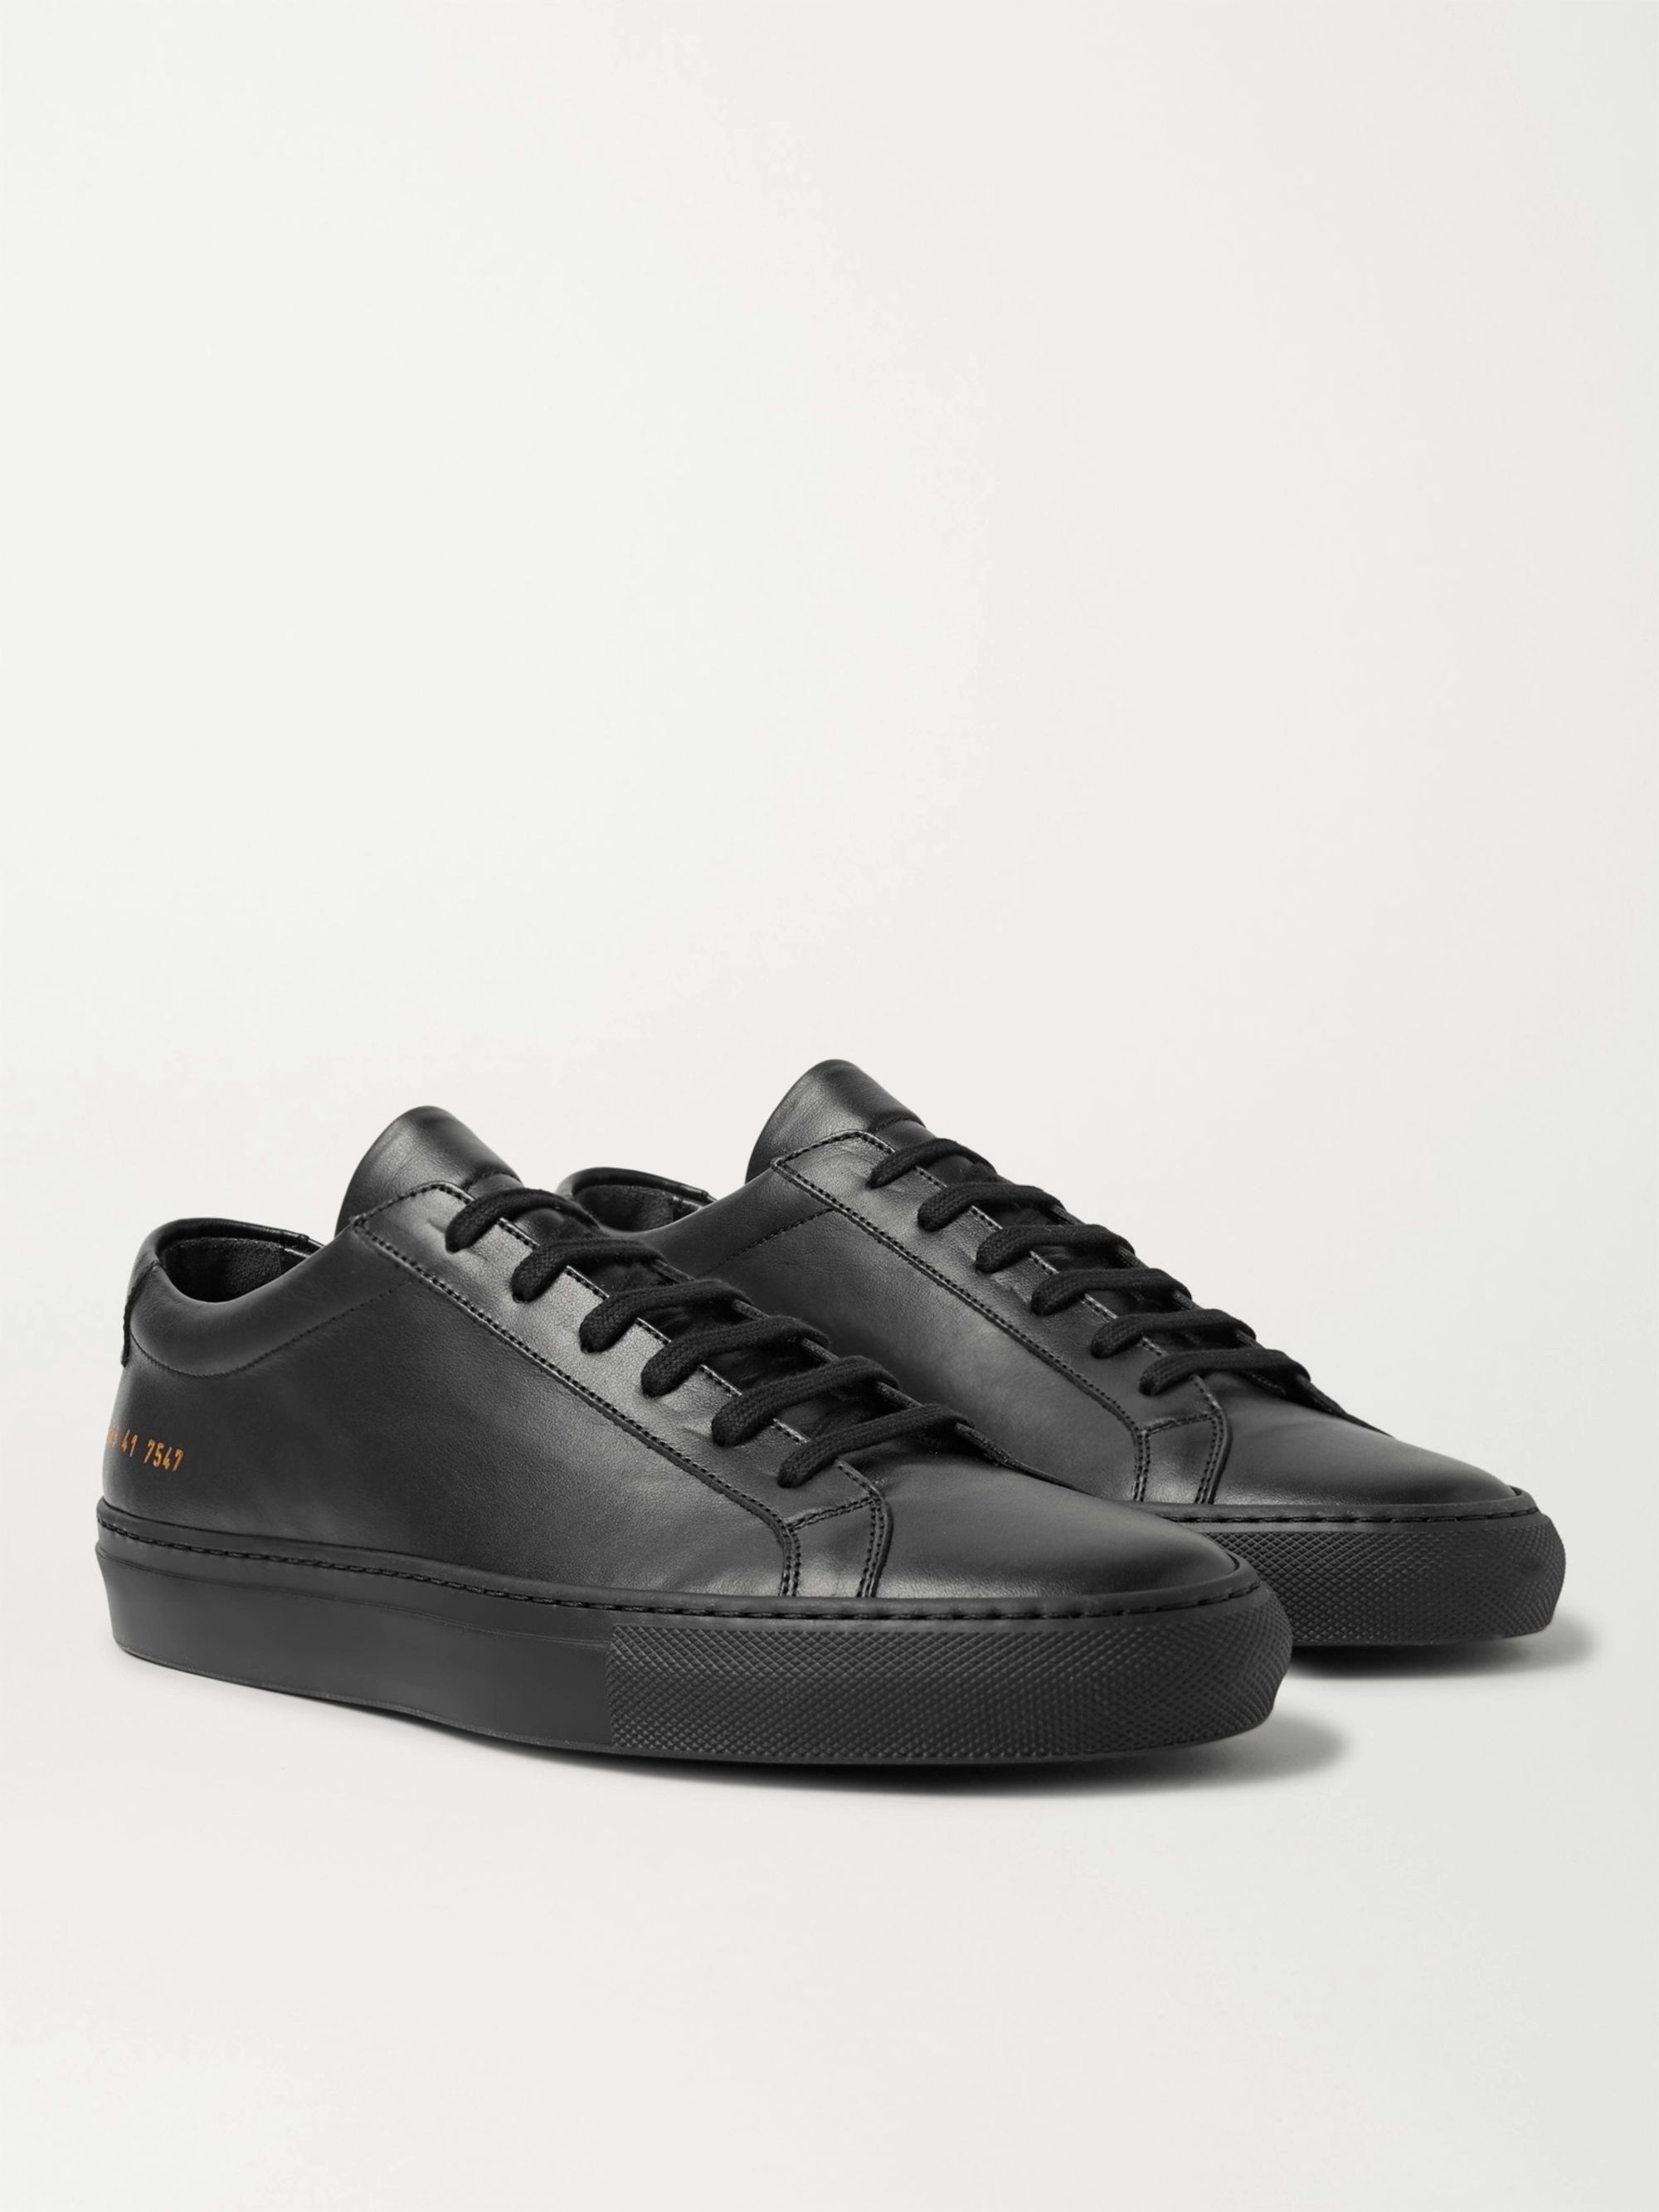 black leather sneakers off 72 